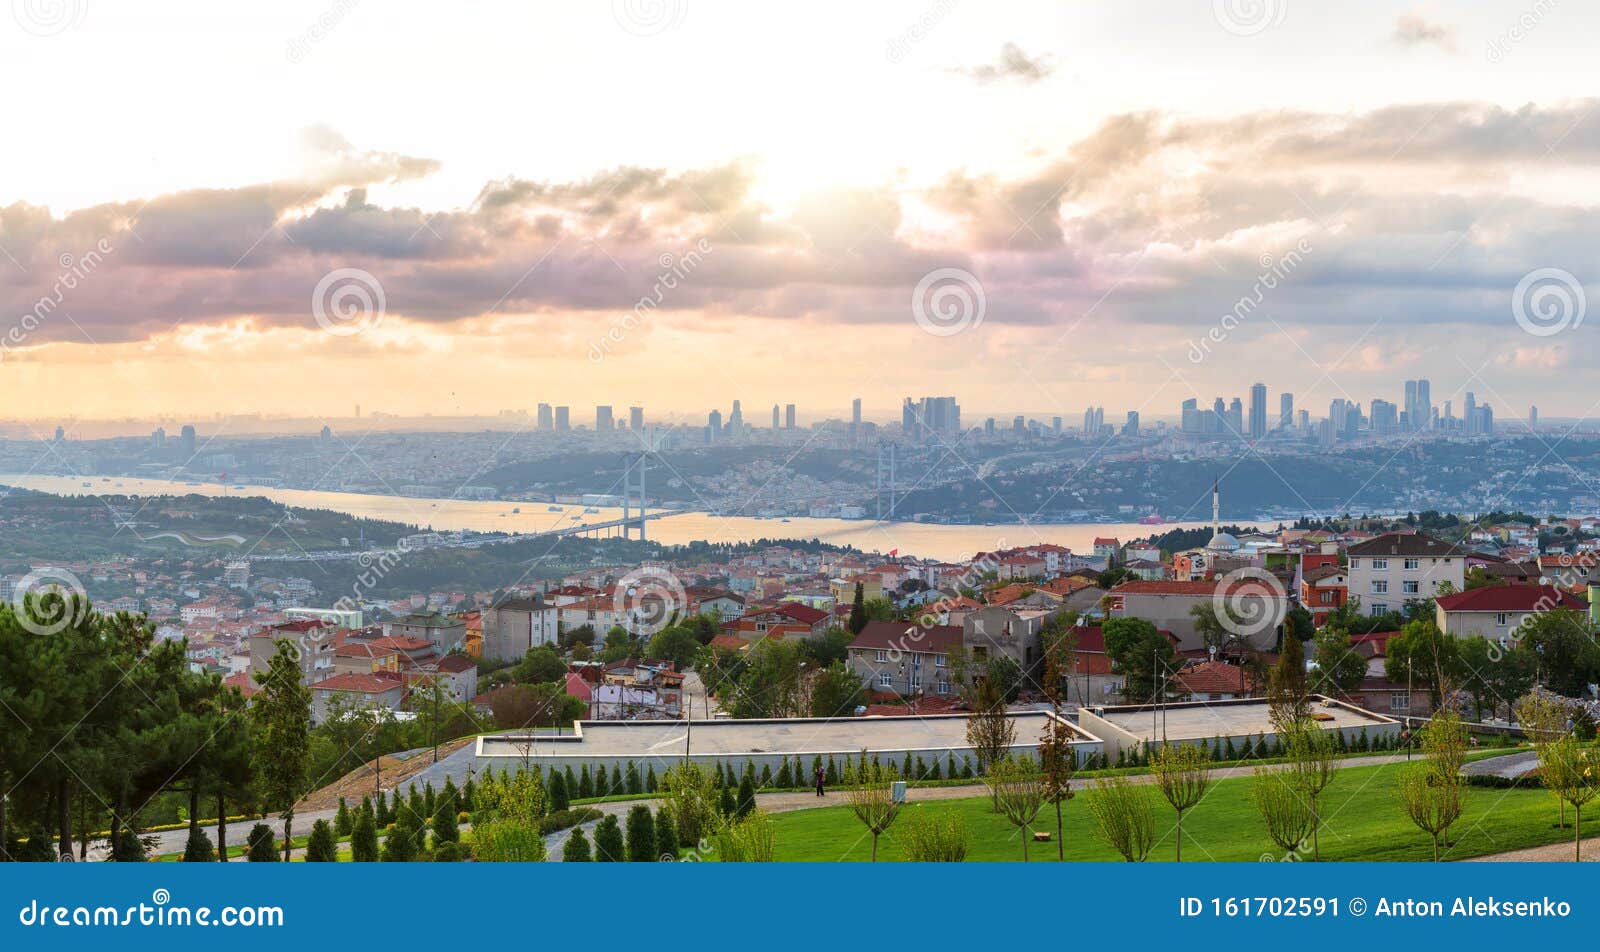 view on the bosphorus bridge and istanbul skyscrappers from camlica hill, turkey